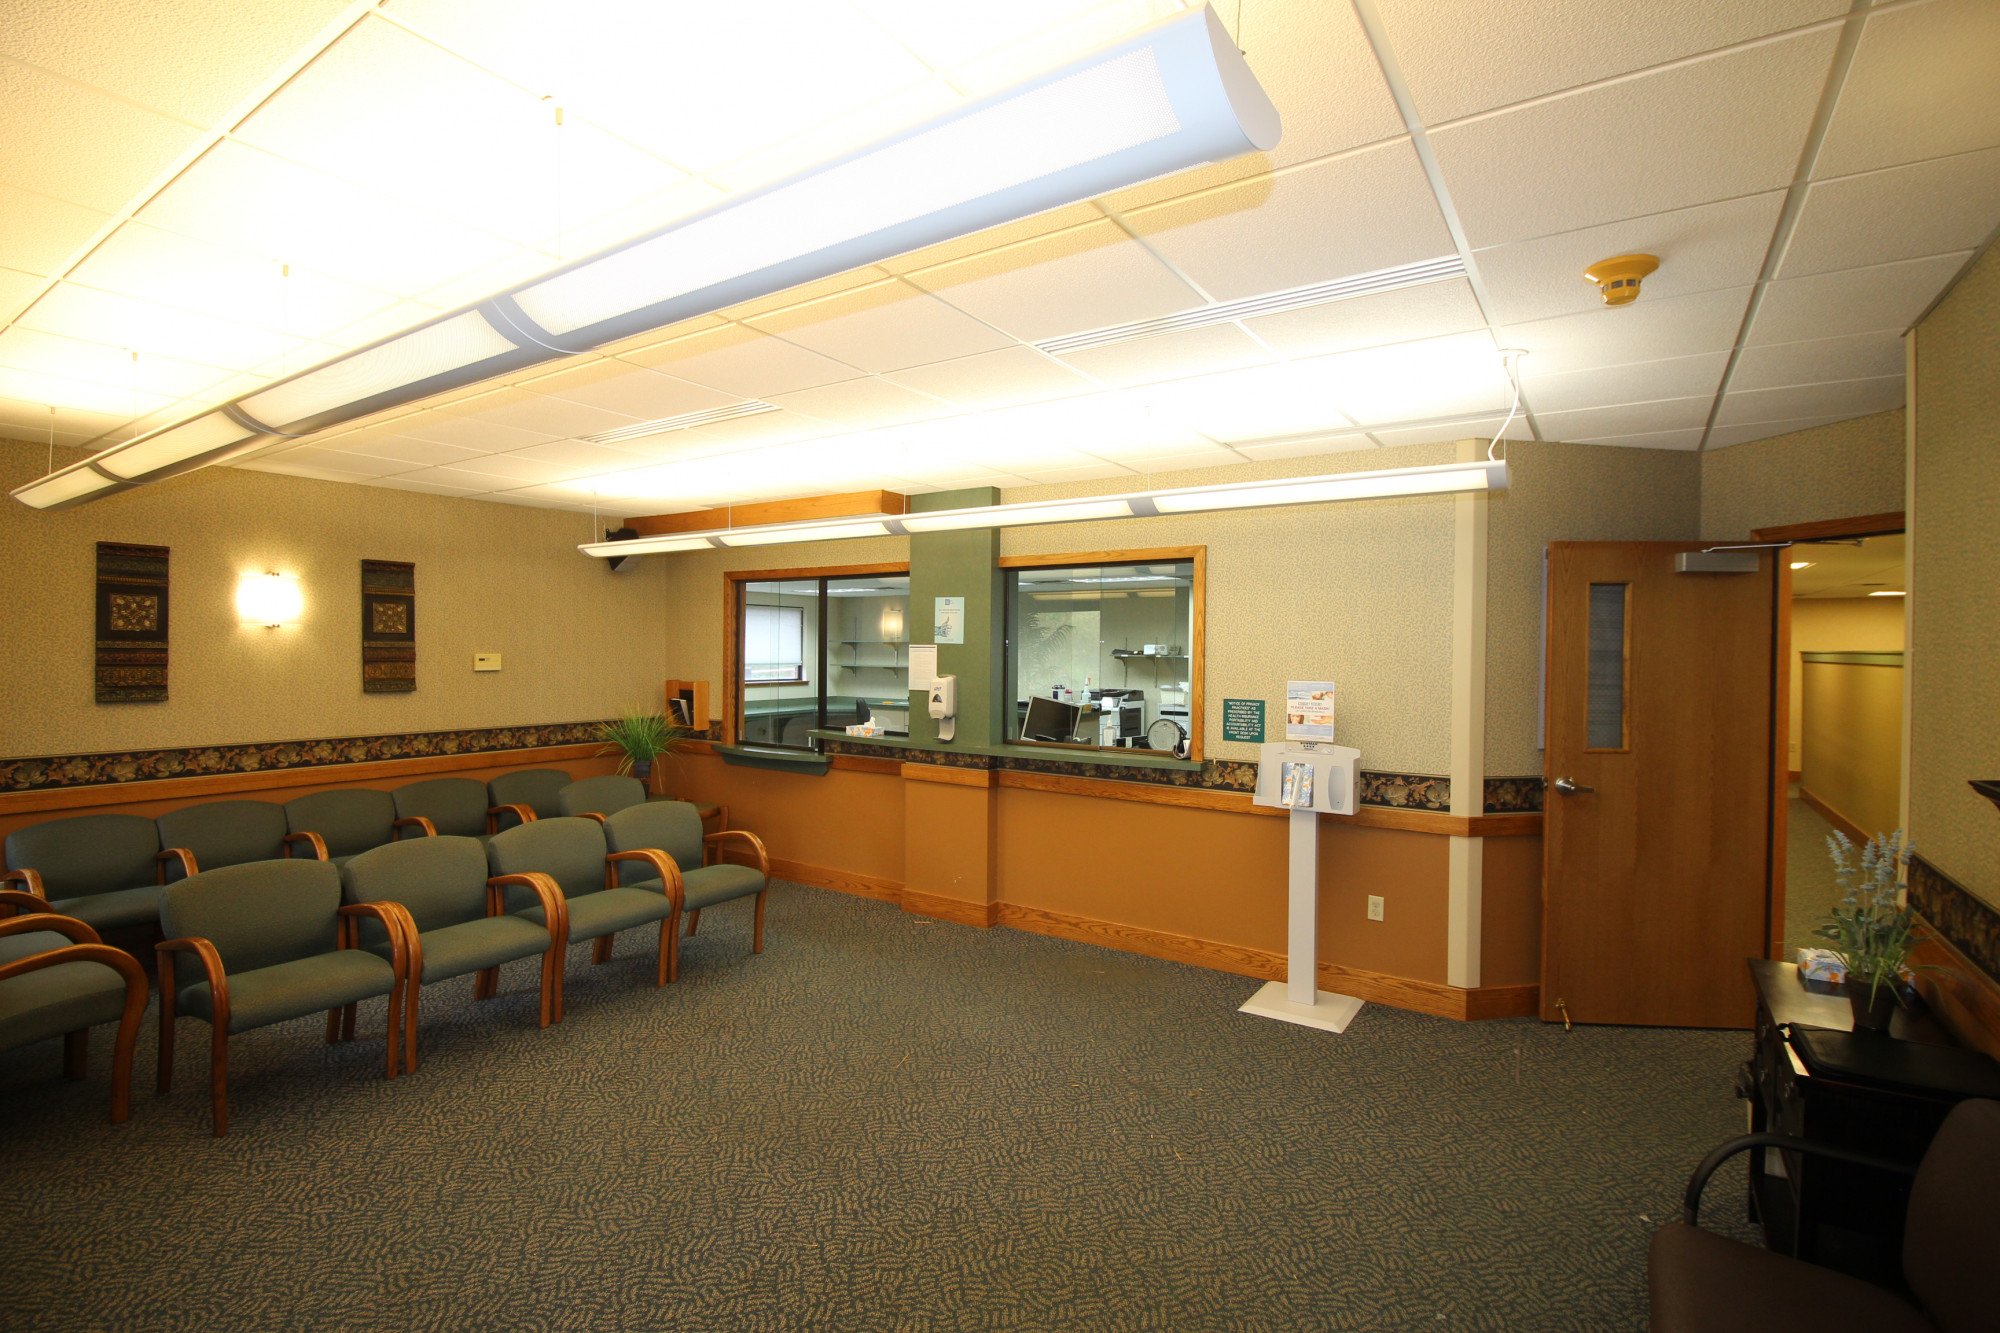 Sturges Property Group - General/Medical Office, 2520 Lake Ave, Fort Wayne, IN 46805